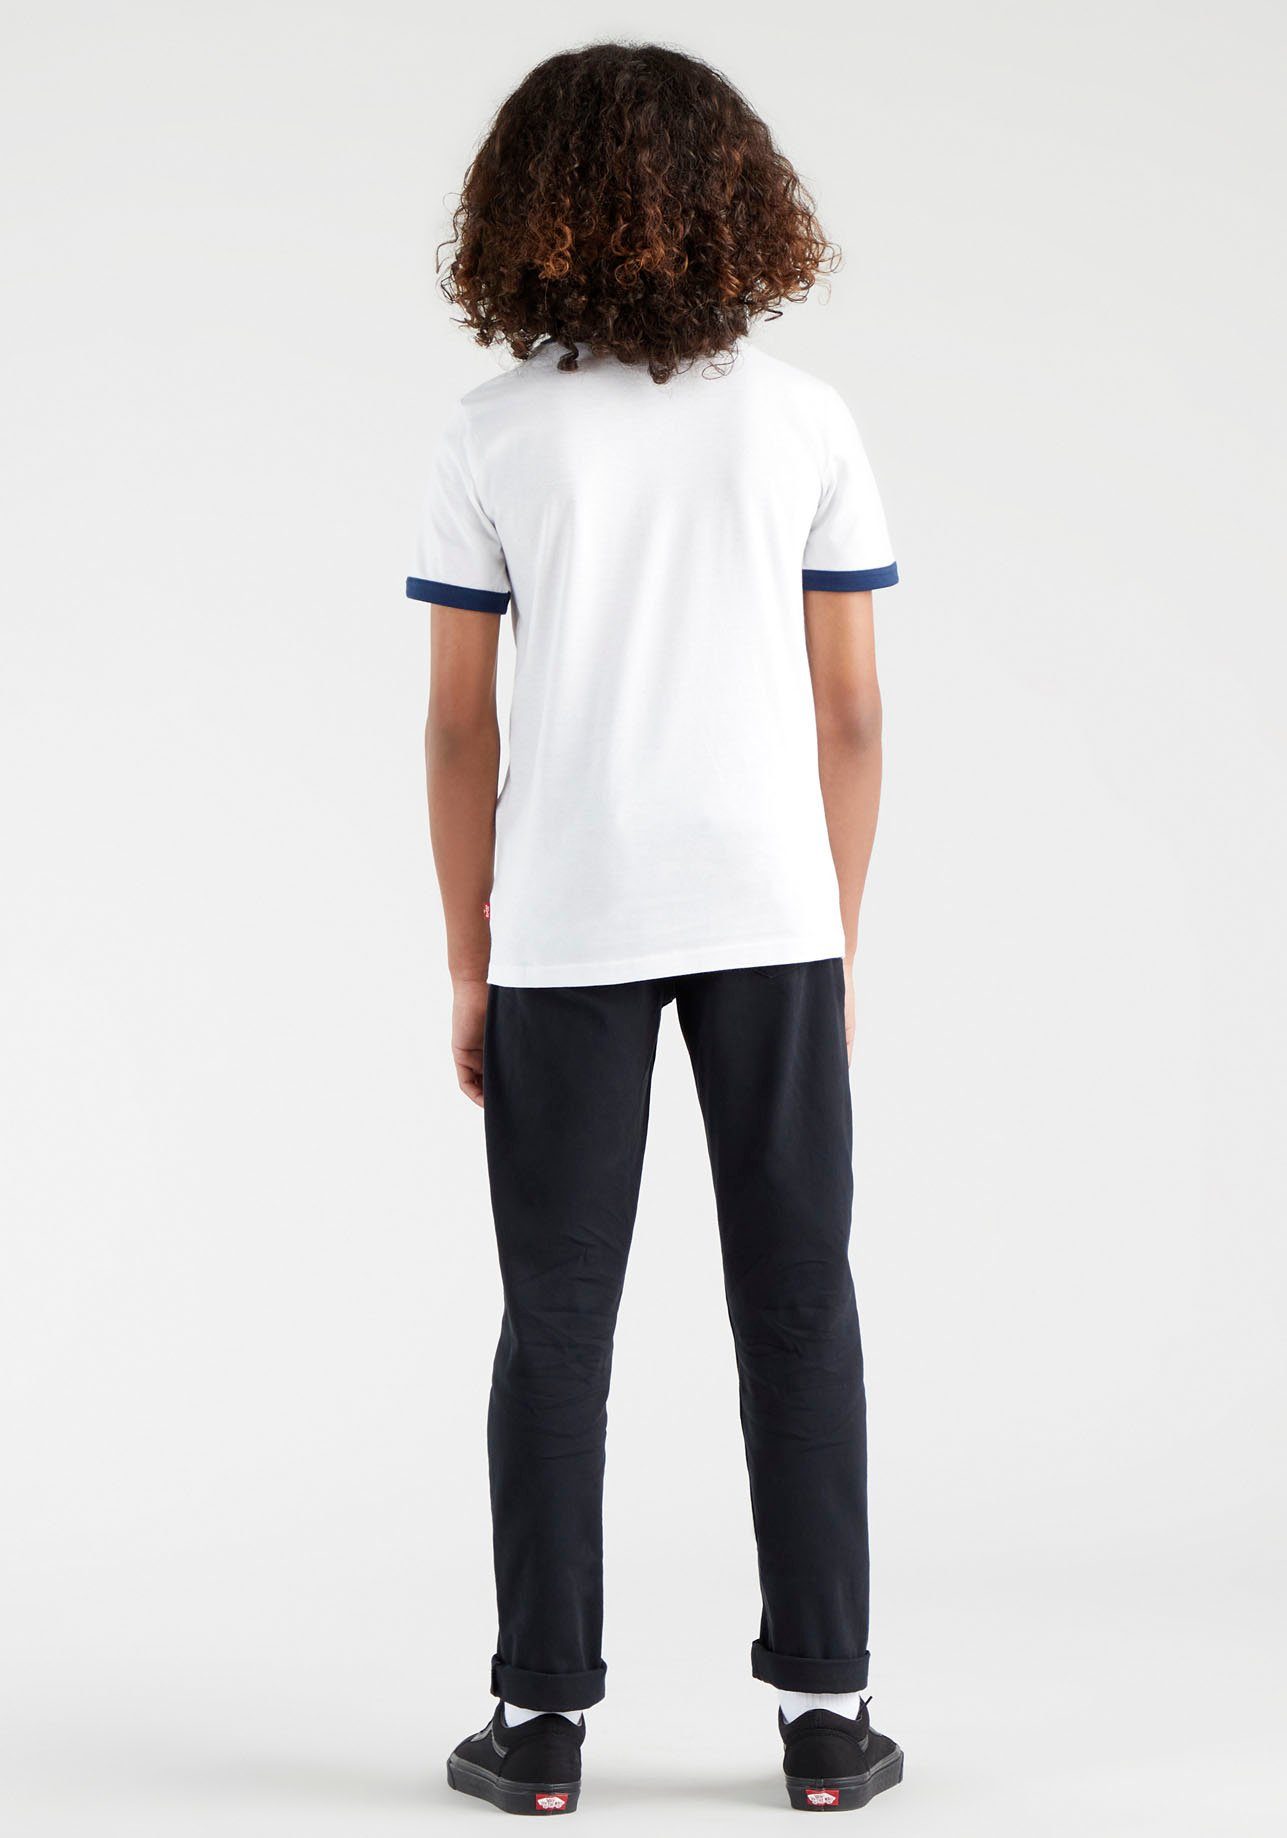 for BOYS Levi's® Kids T-Shirt TEE BATWING RINGER weiß